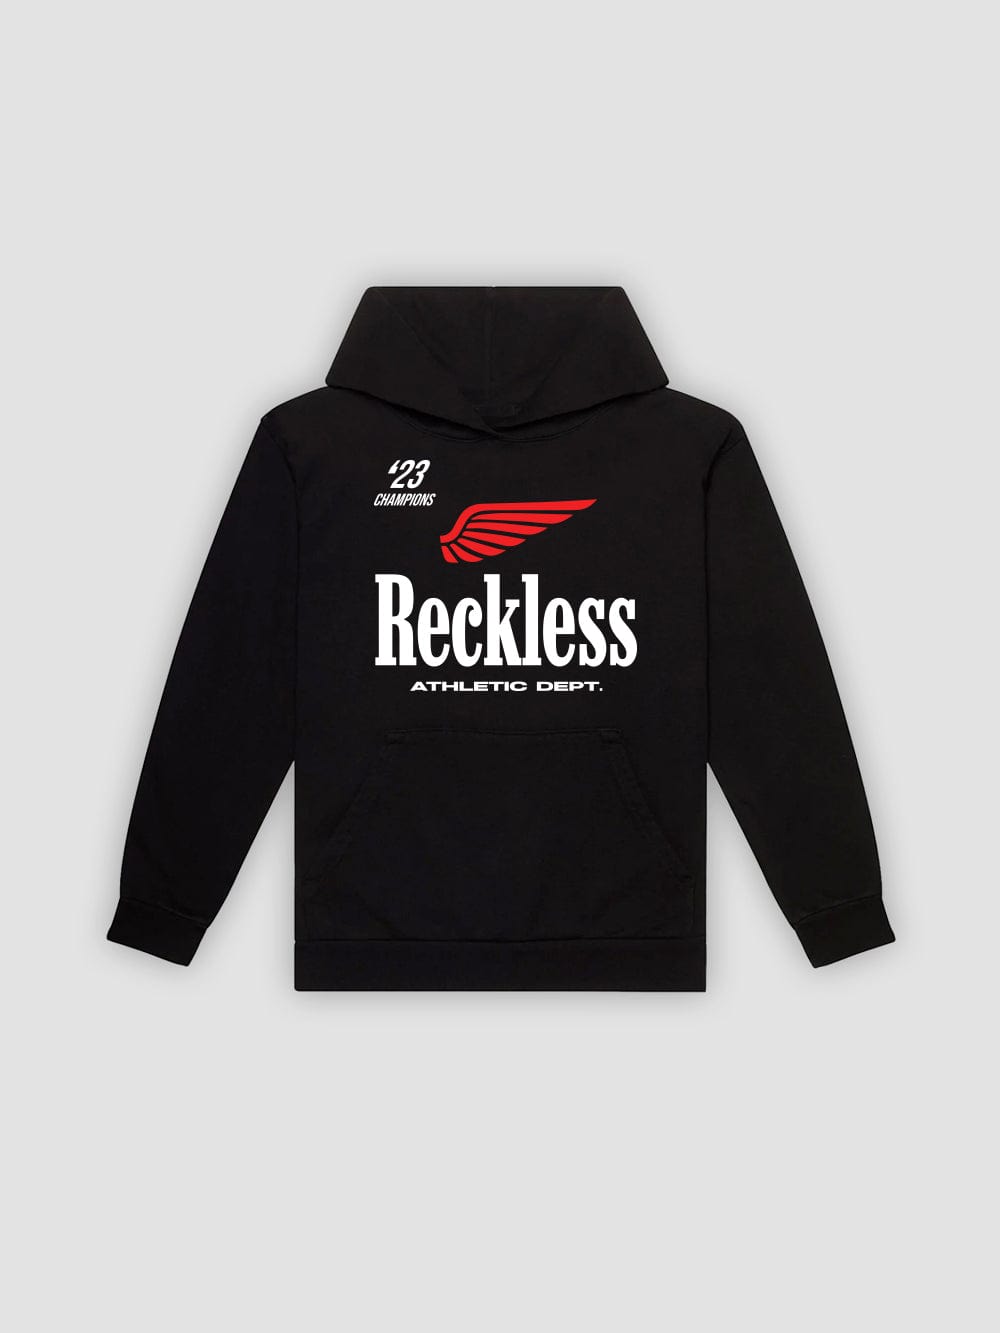 Racing Club Tee - White – Young & Reckless